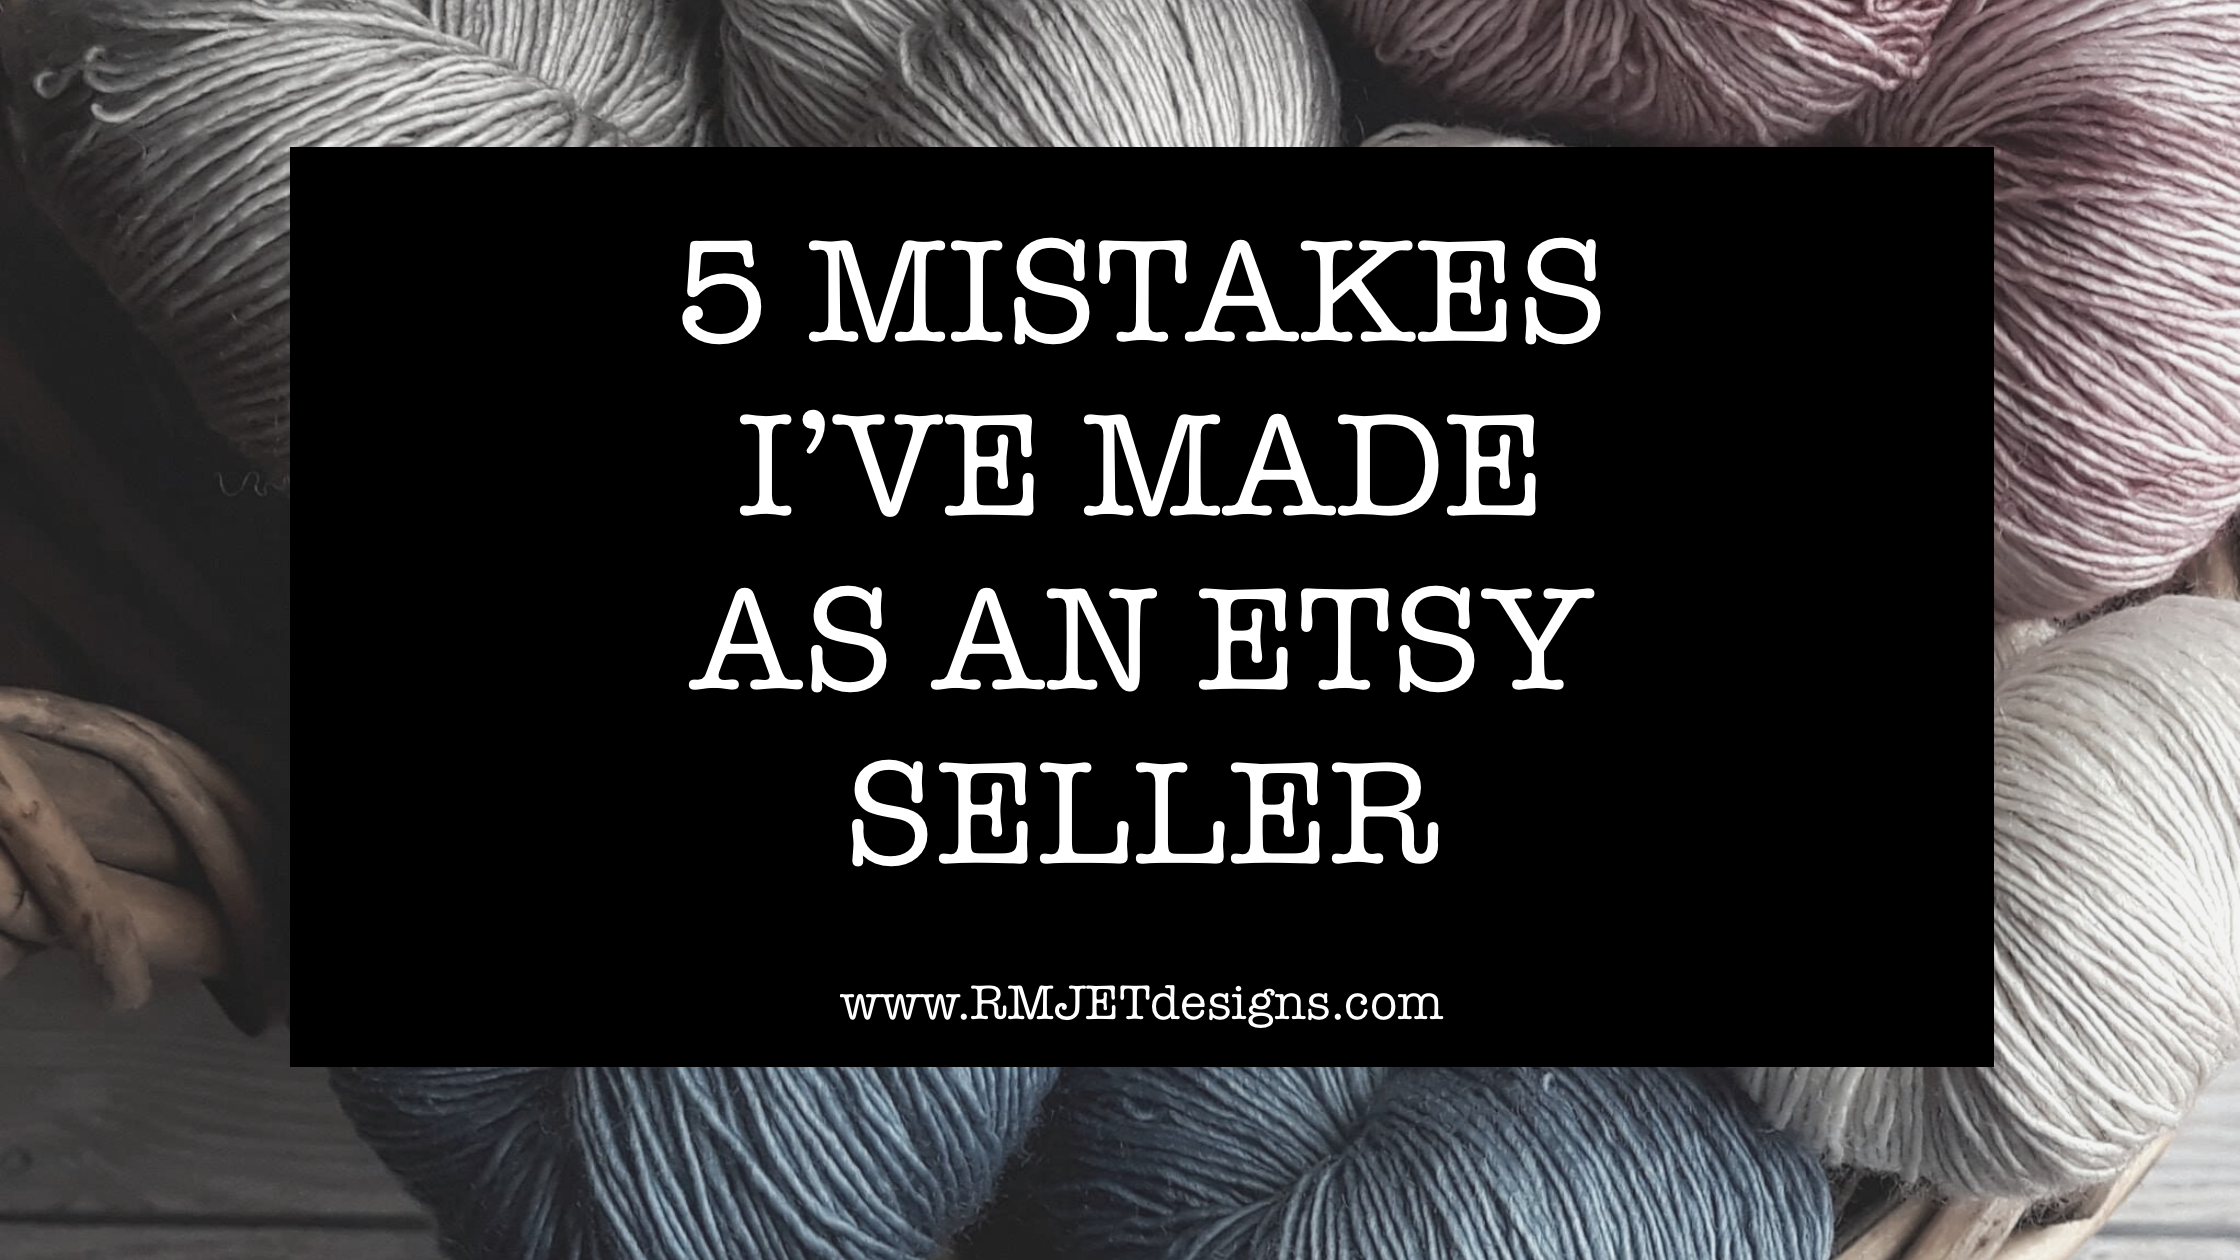 5 Mistakes I’ve Made As An Etsy Seller by RMJETdesigns